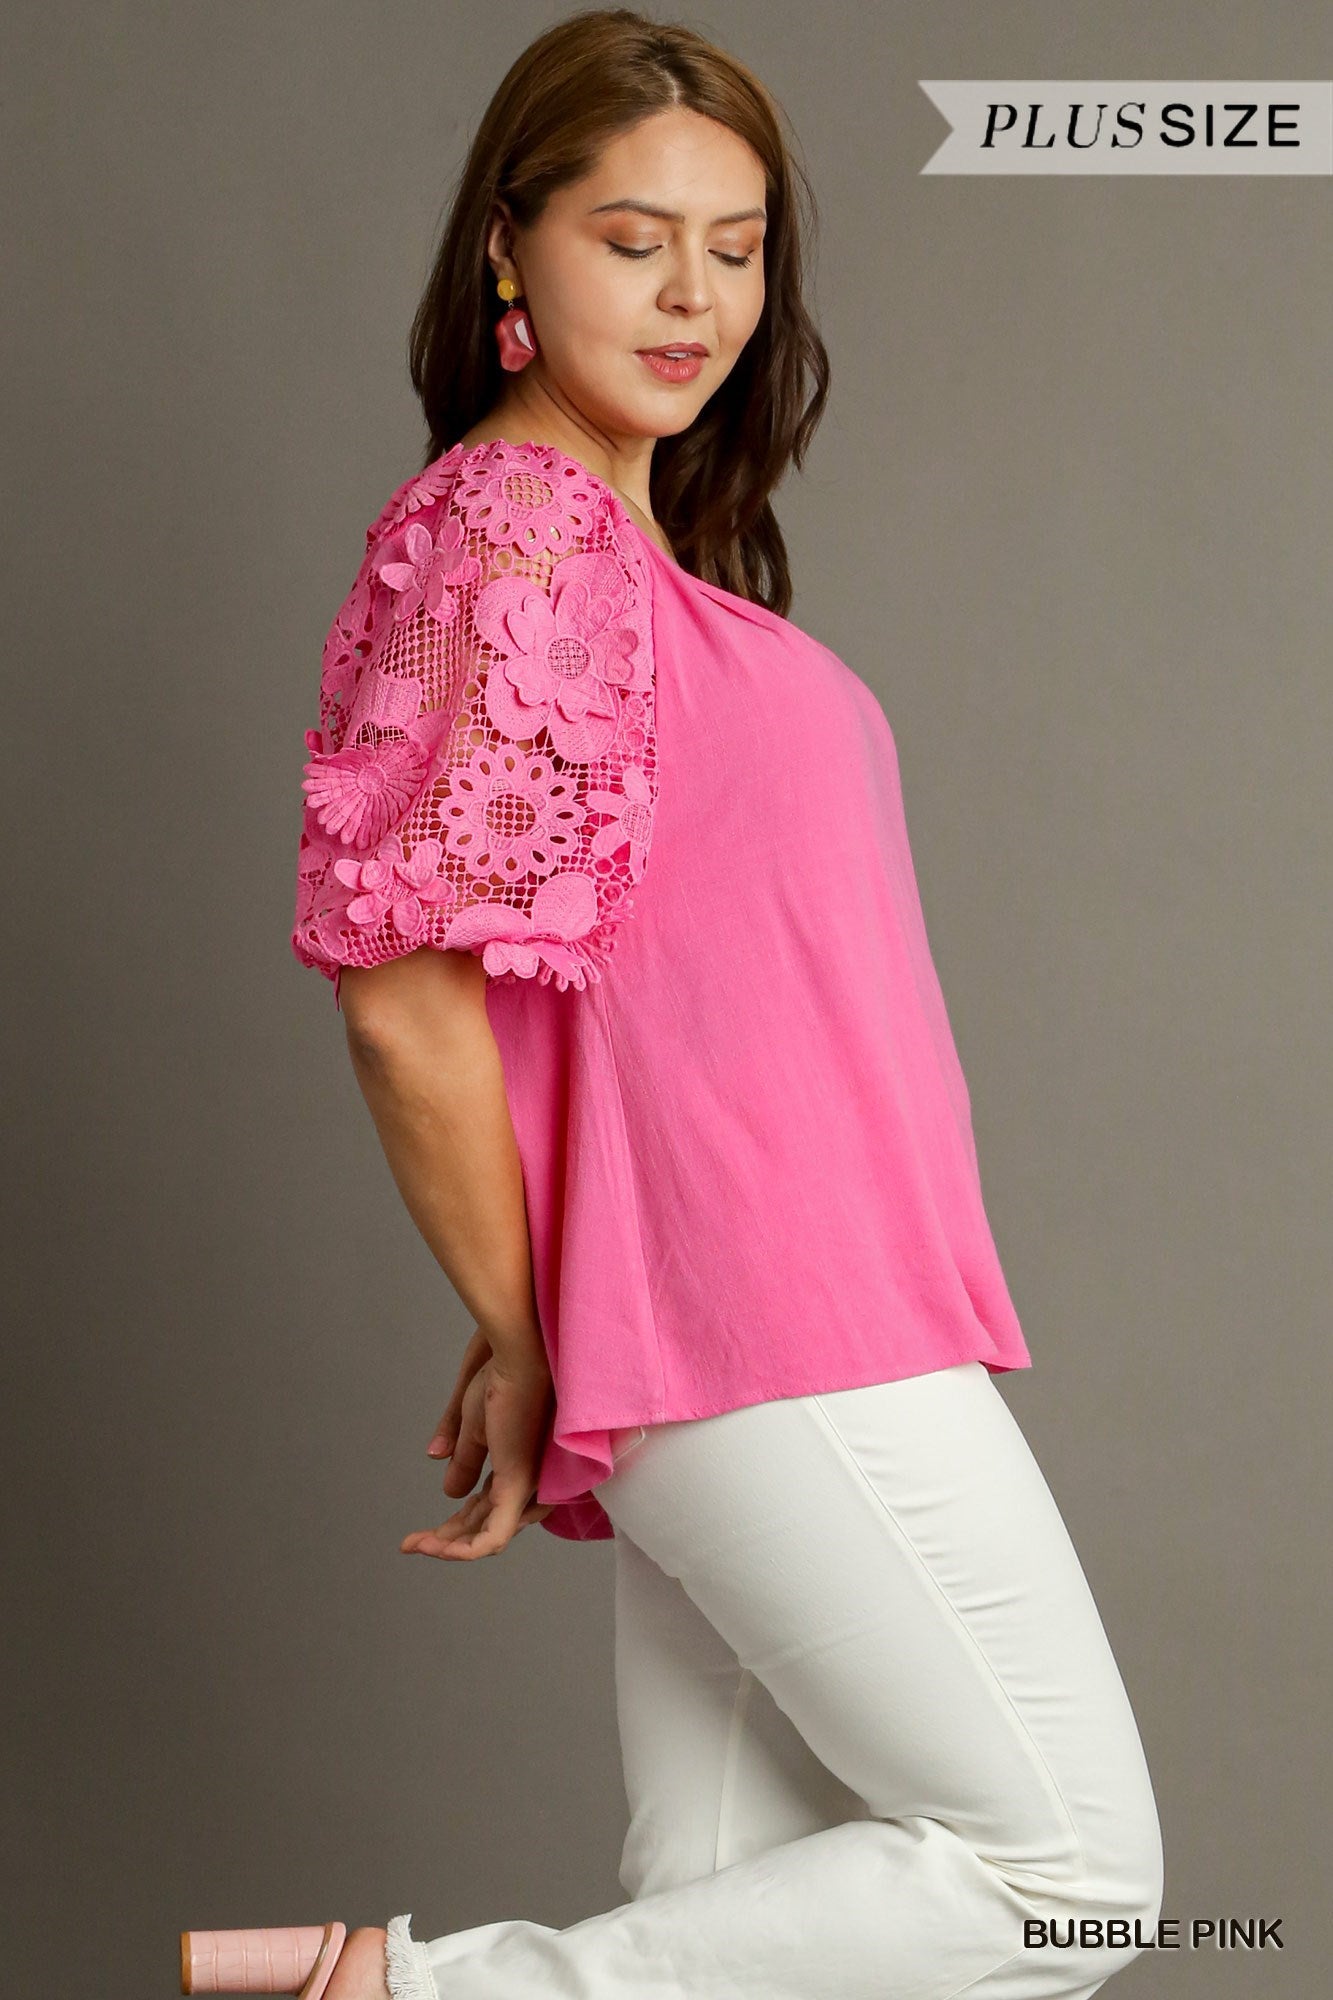 Bubble Gum Pink Linen Blend Top w/ Floral Lace Puff Sleeves